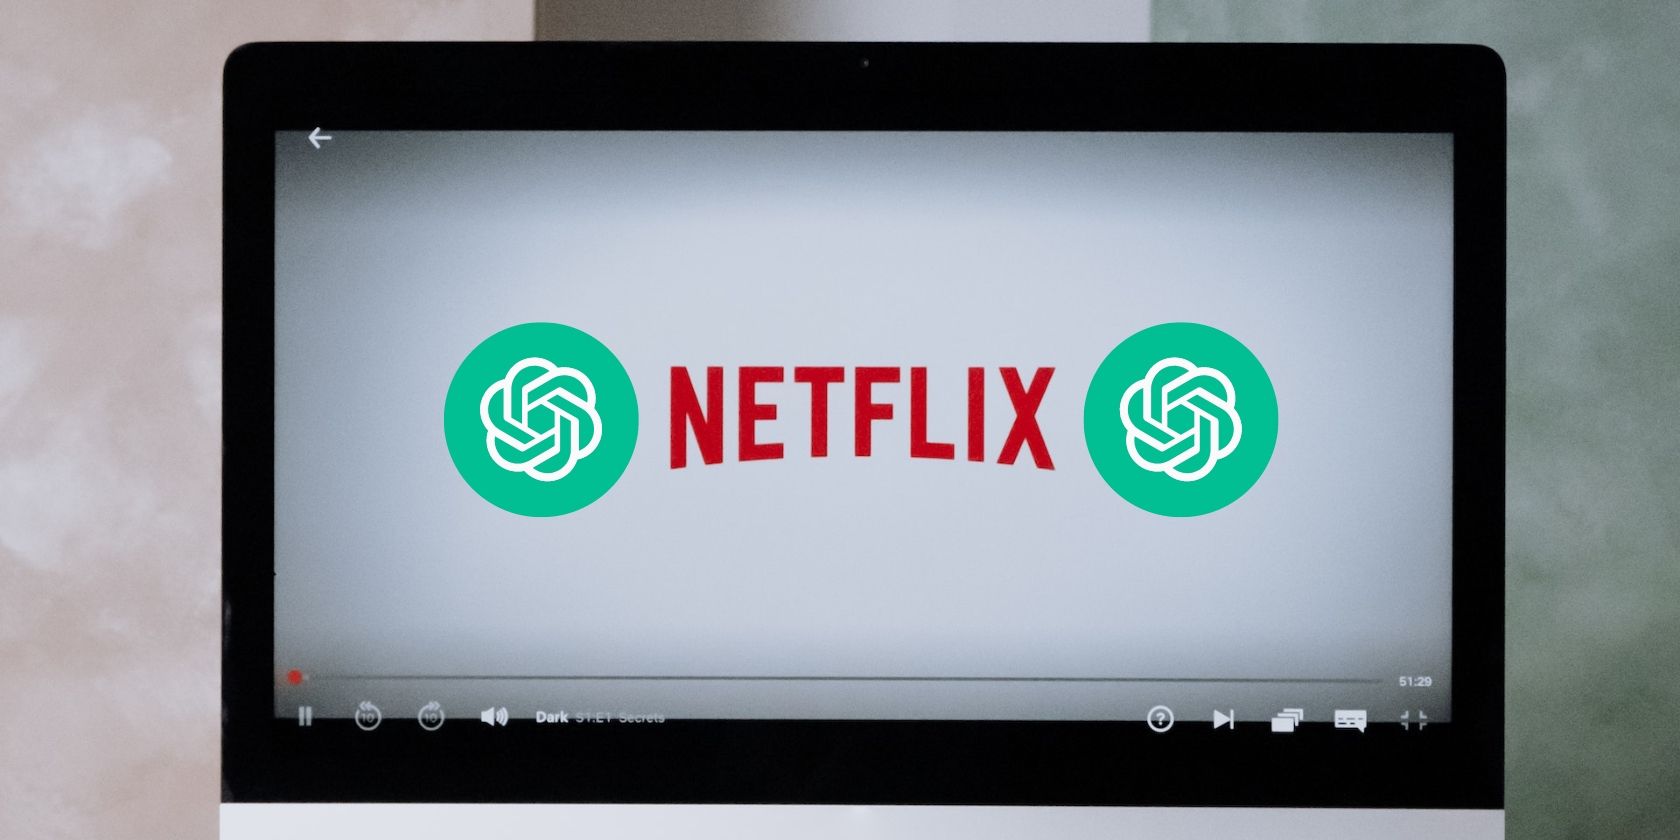 ChatGPT and Netflix logo side by side